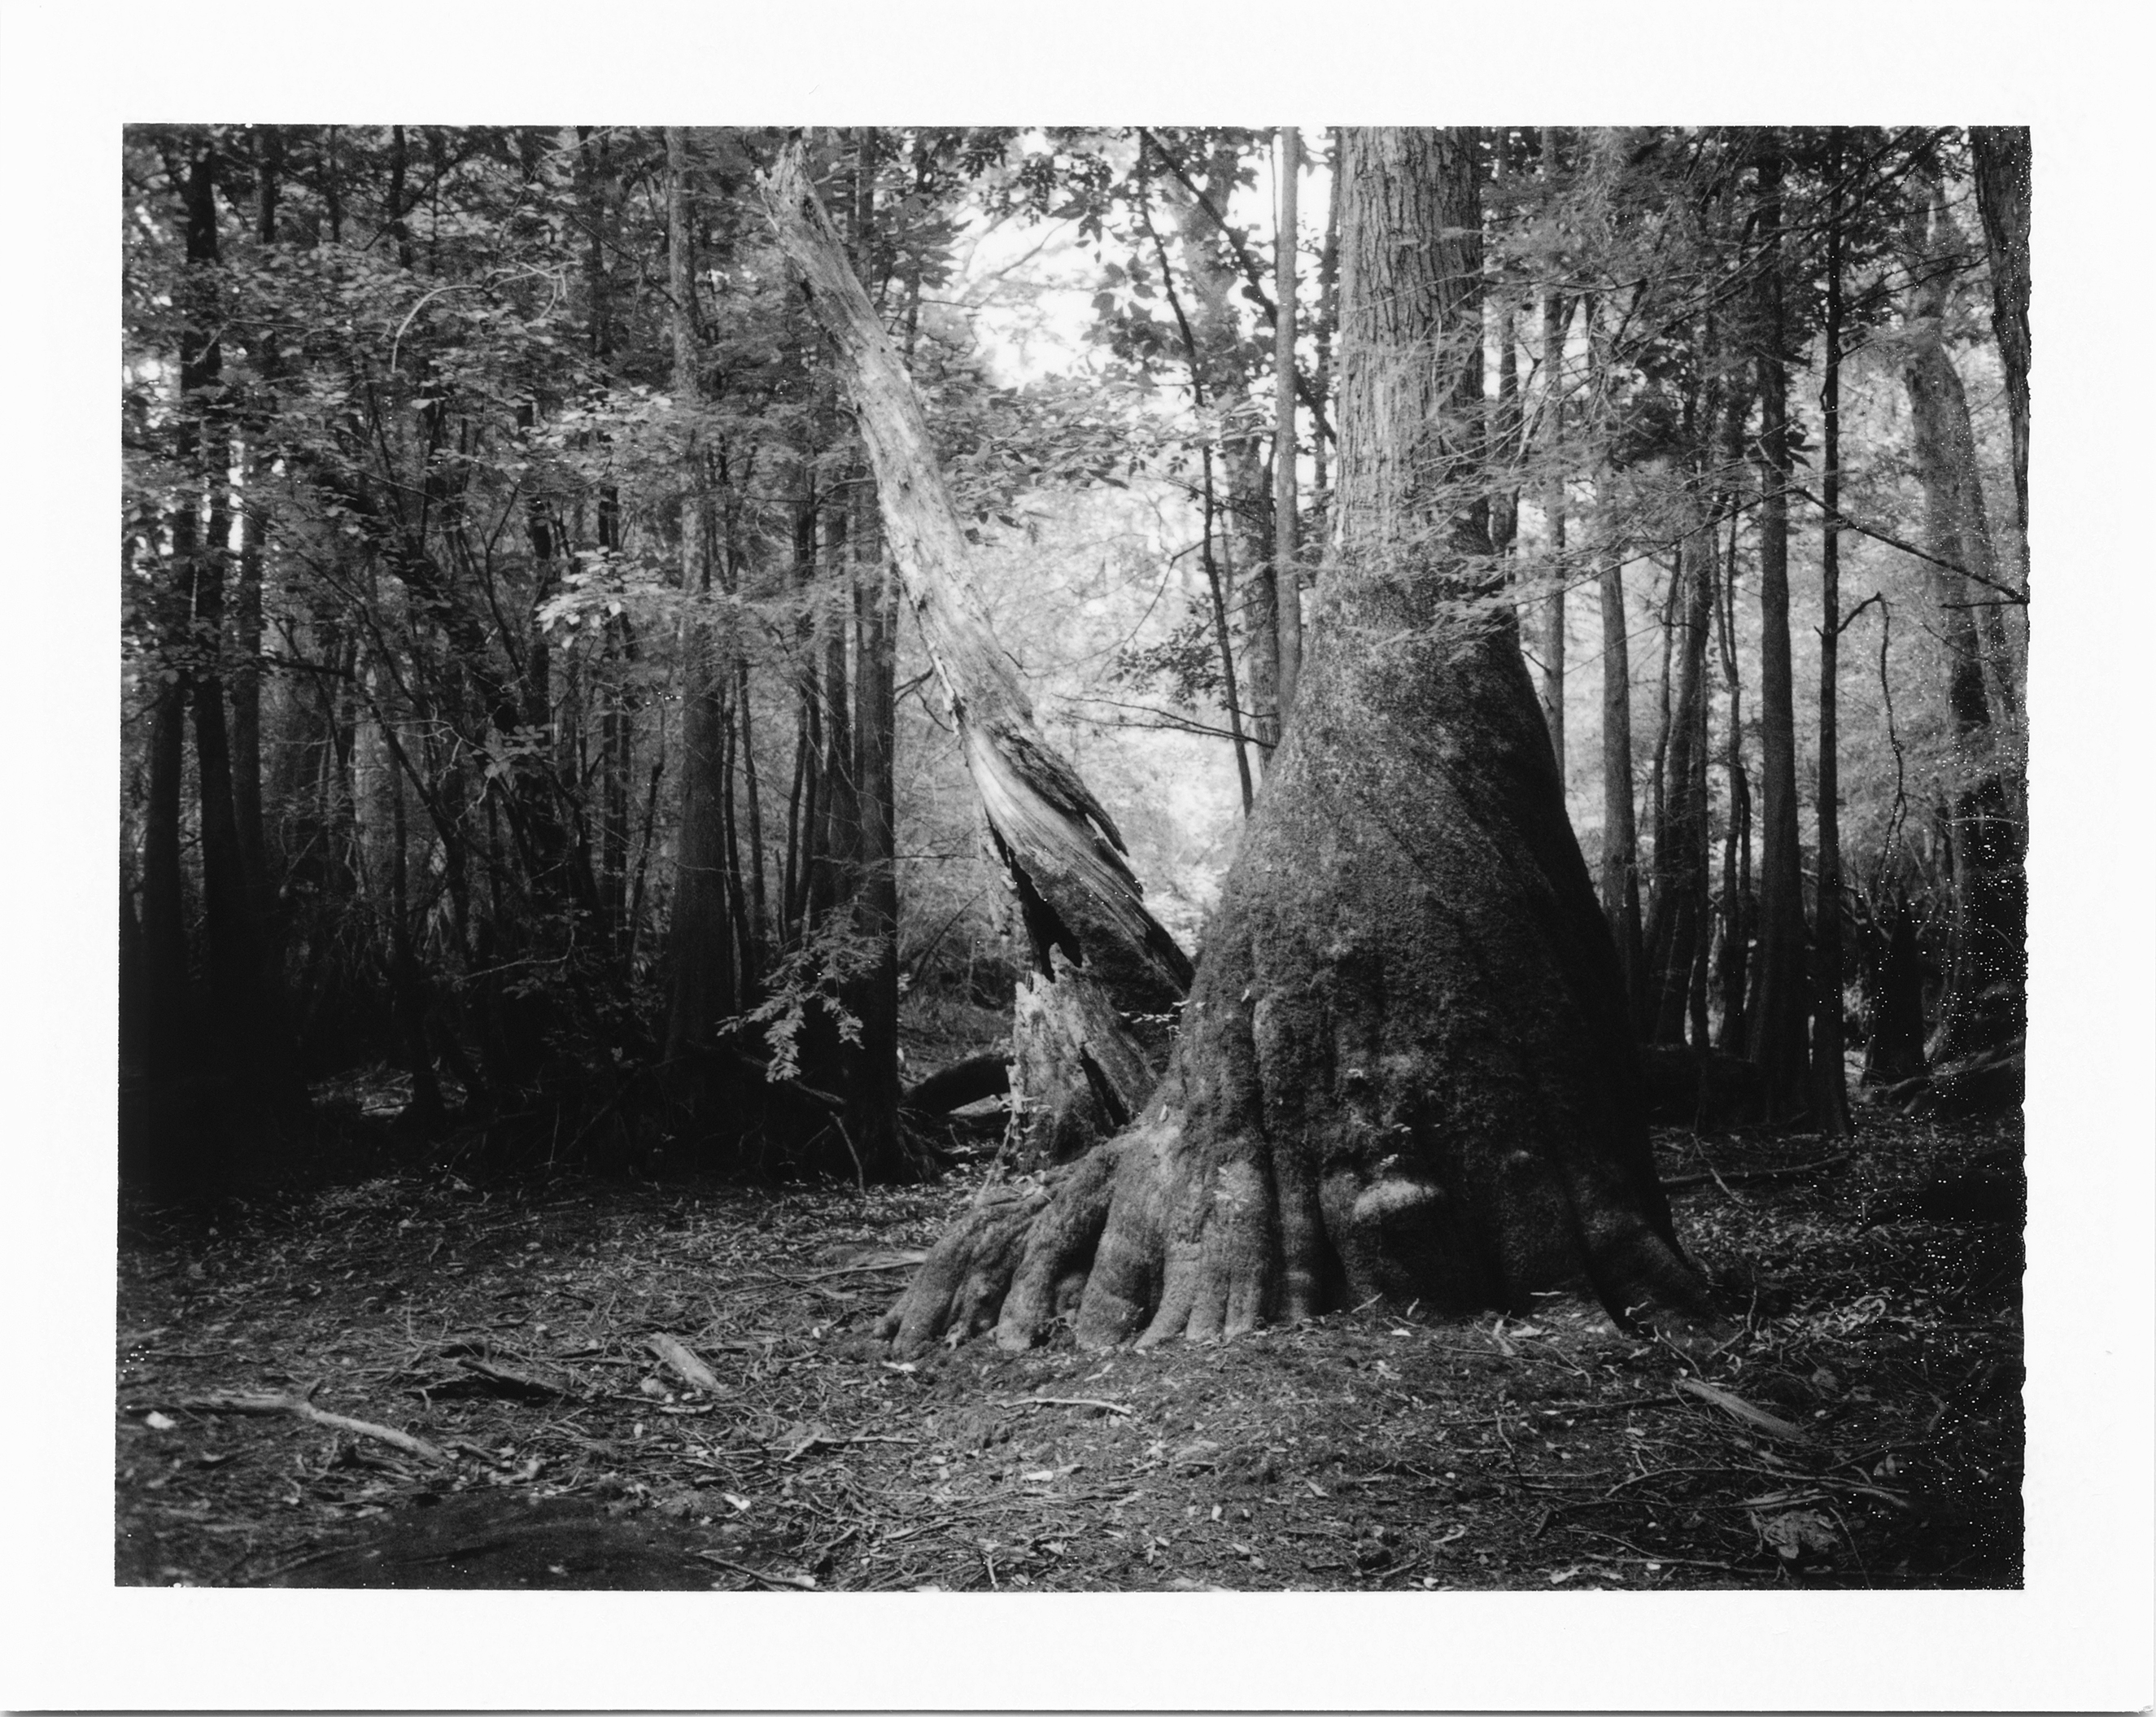 Tracing Time Through Twisting Trees, Slough near the Little Pee Dee River, SC, Summer 2015